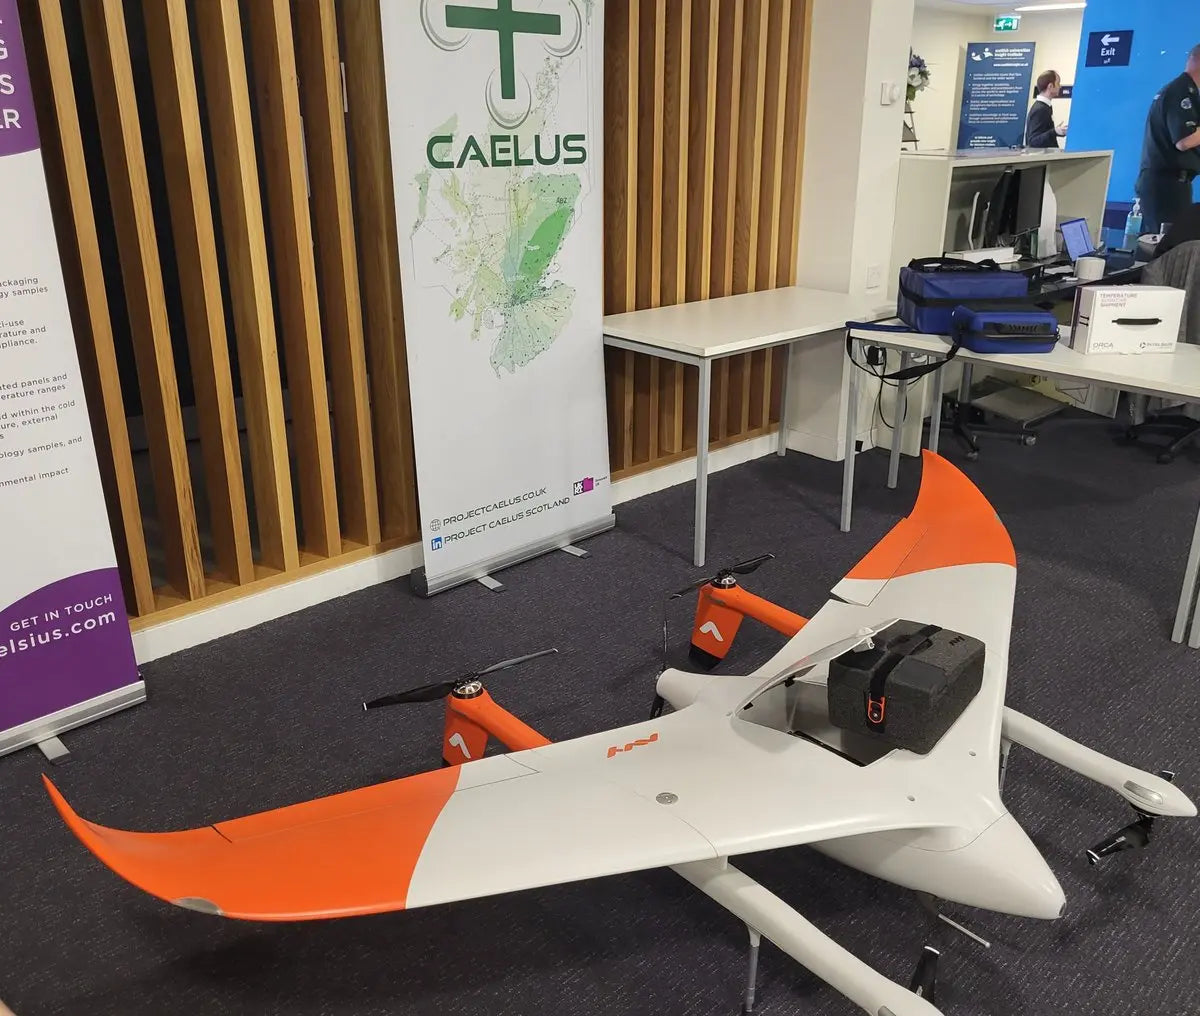 How the UK's first medical drone CAELUS network will revolutionize healthcare Paisley Autocare